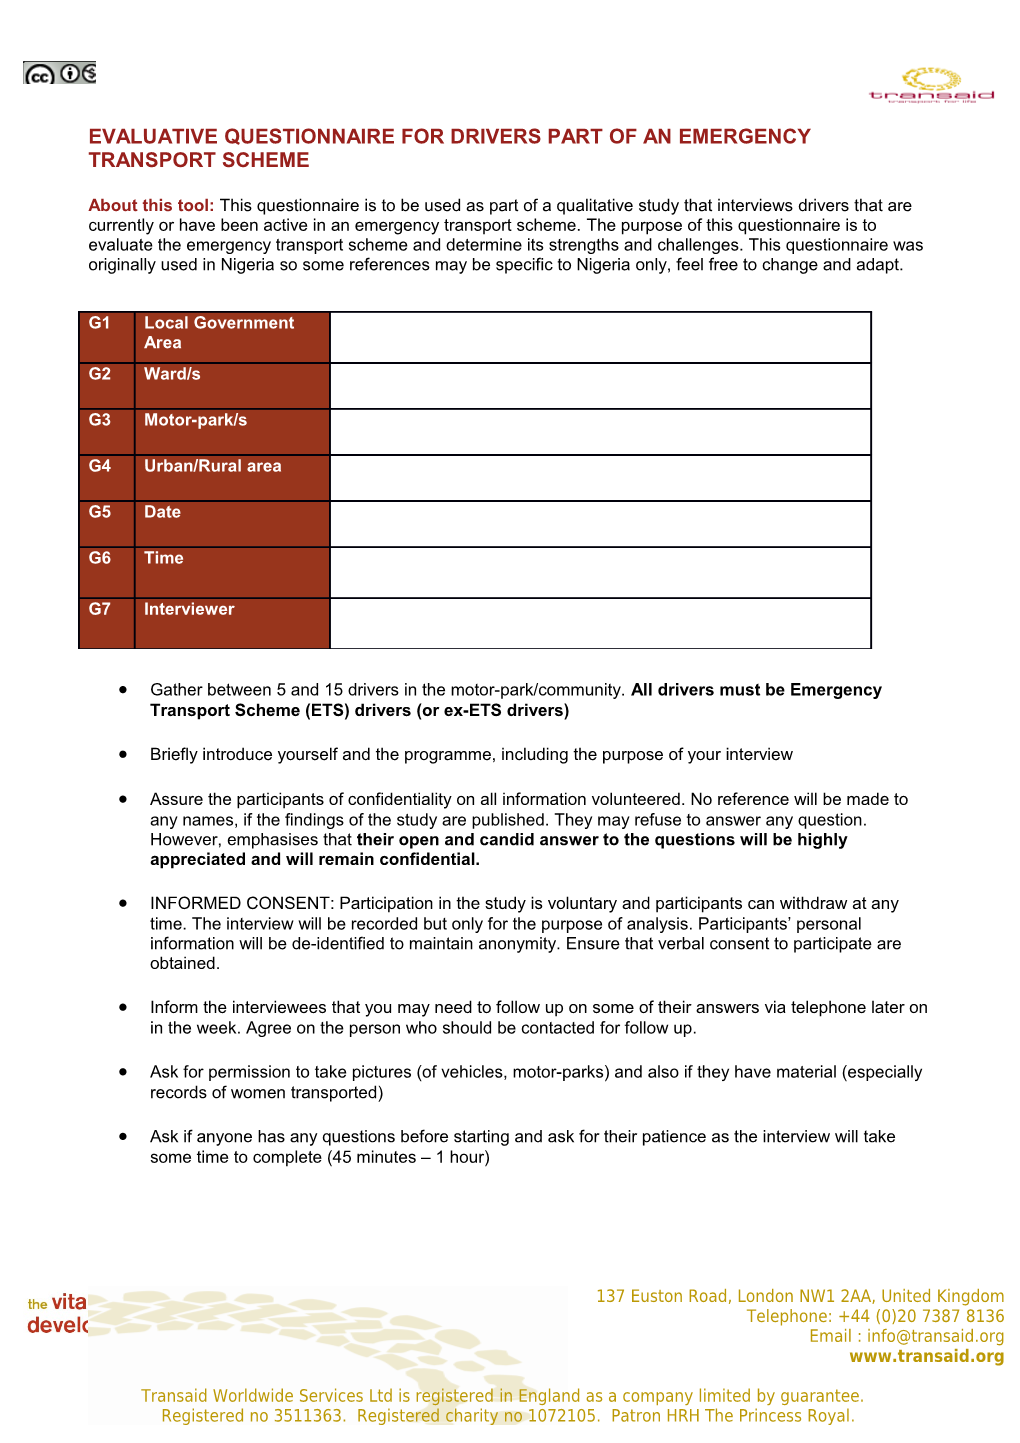 Evaluative Questionnaire for Drivers Part of an Emergency Transport Scheme